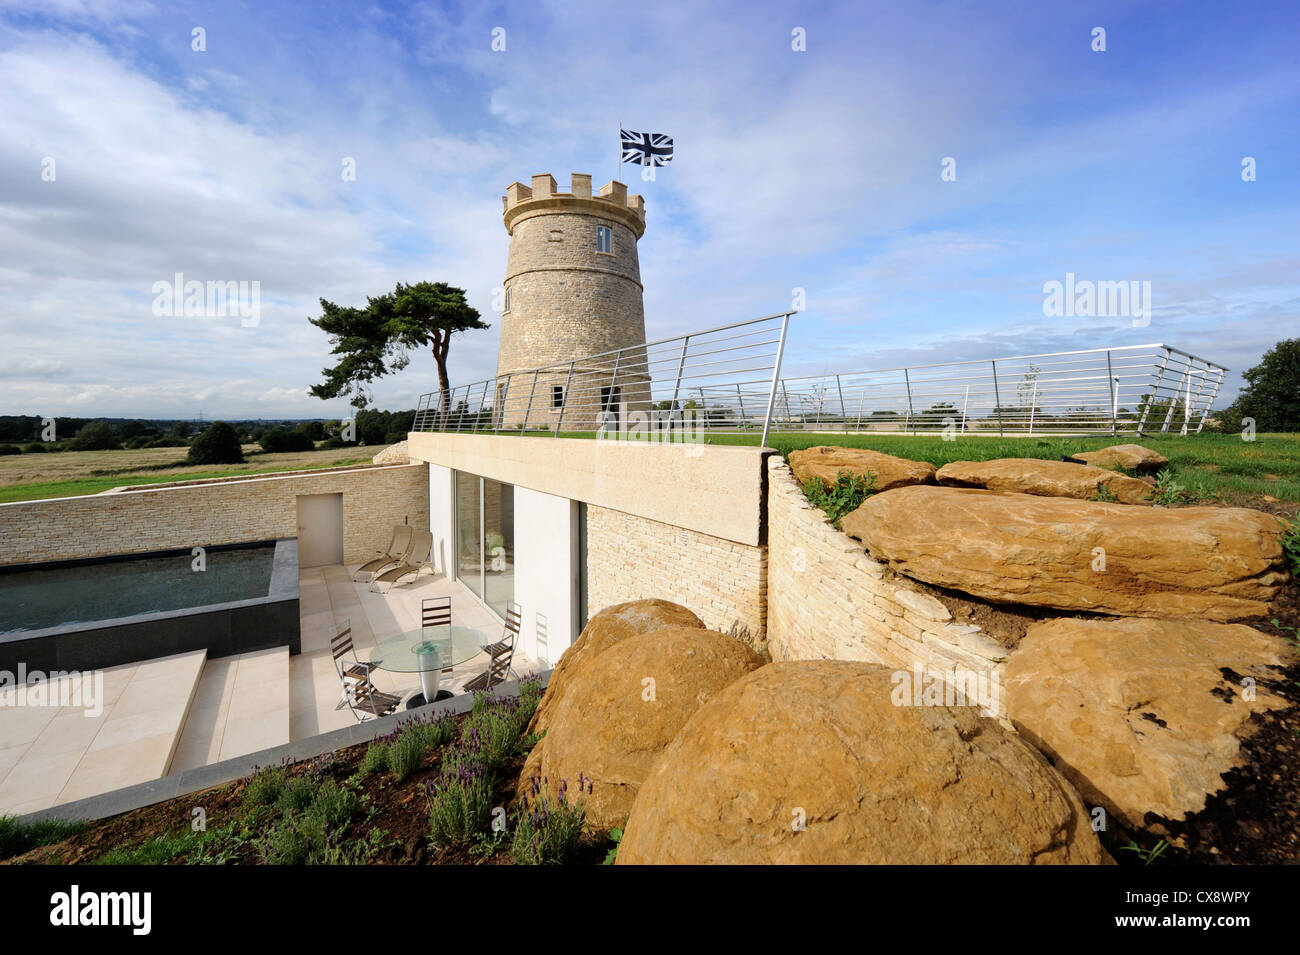 The Round Tower, a property development near Cirencester incorporating modern underground living space, swimming pool and an exi Stock Photo